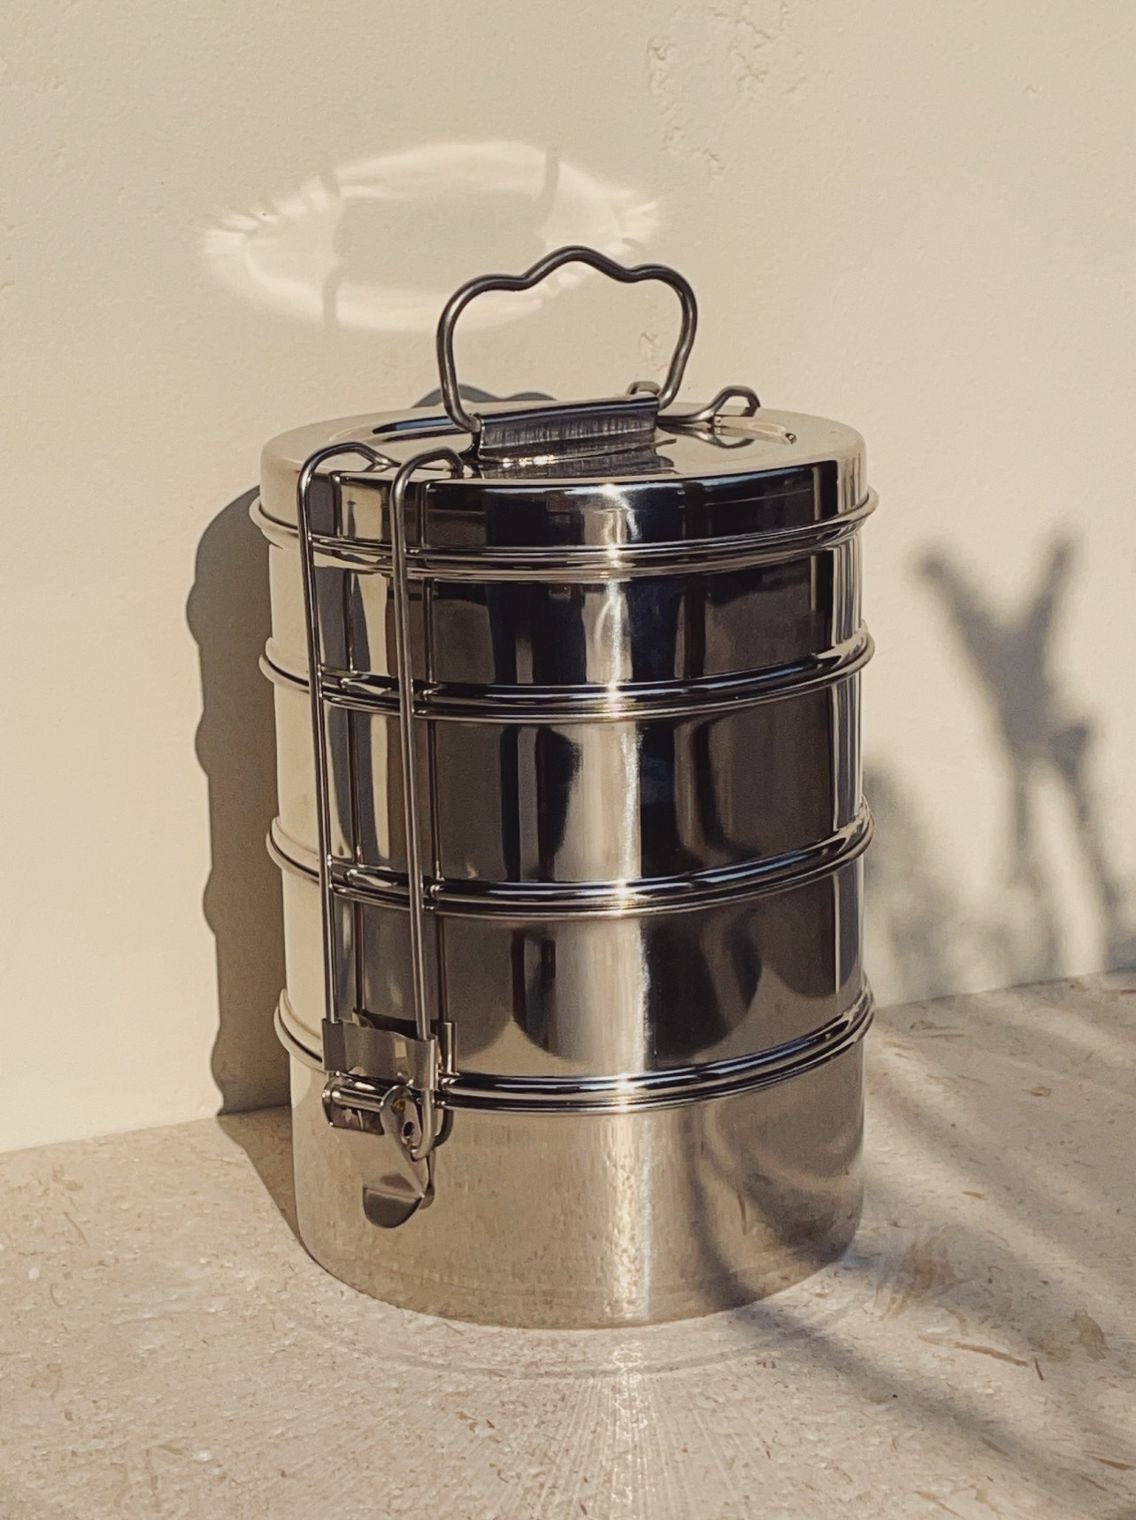 4 tiered stainless steel lunch box